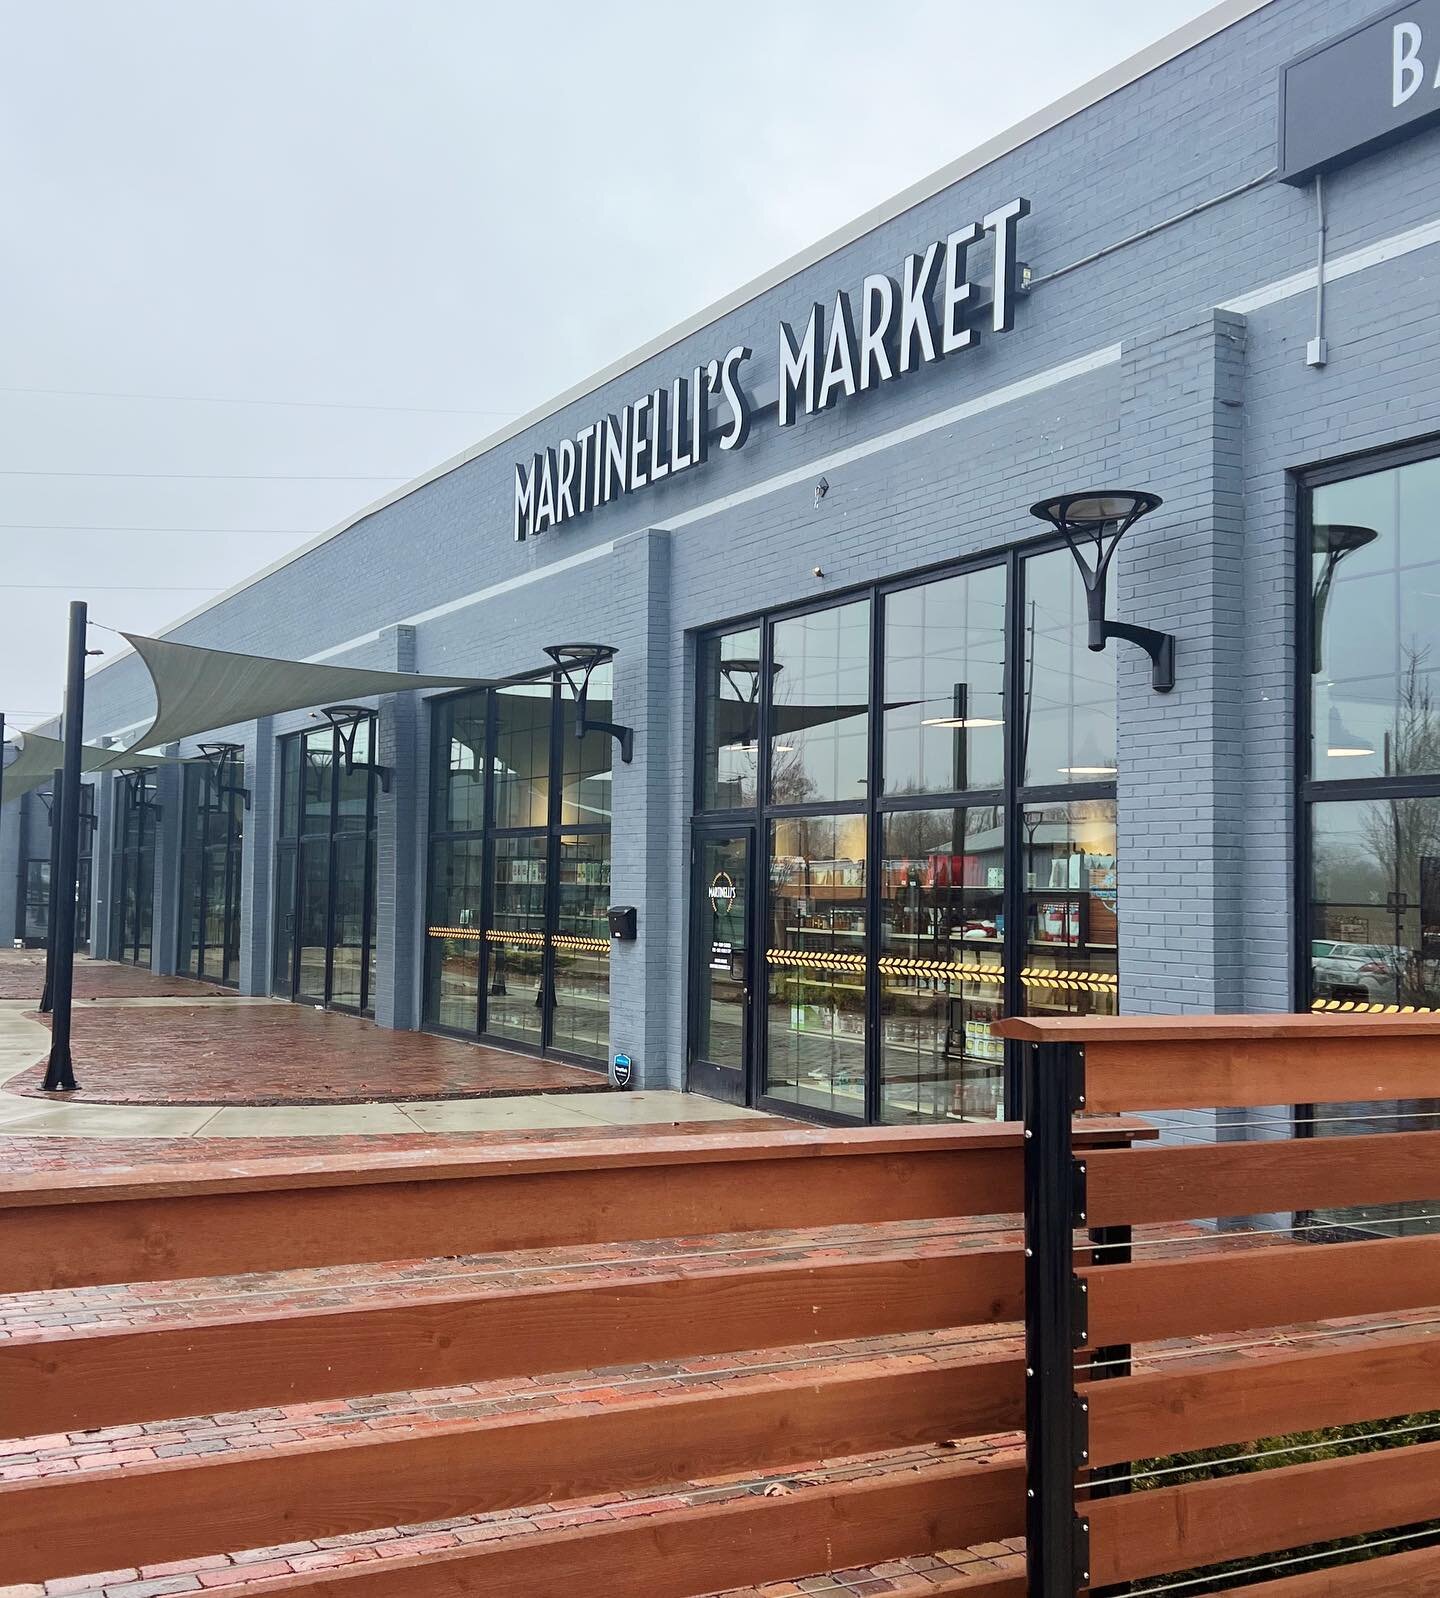 Good architecture and even better food! Check out the firms new neighbor, Martinelli&rsquo;s Market.
.
.
500C N Walnut St
.
.
.
.
.
.
#architecture #architect #archdesign #design #champaign #illini #universityofillinois